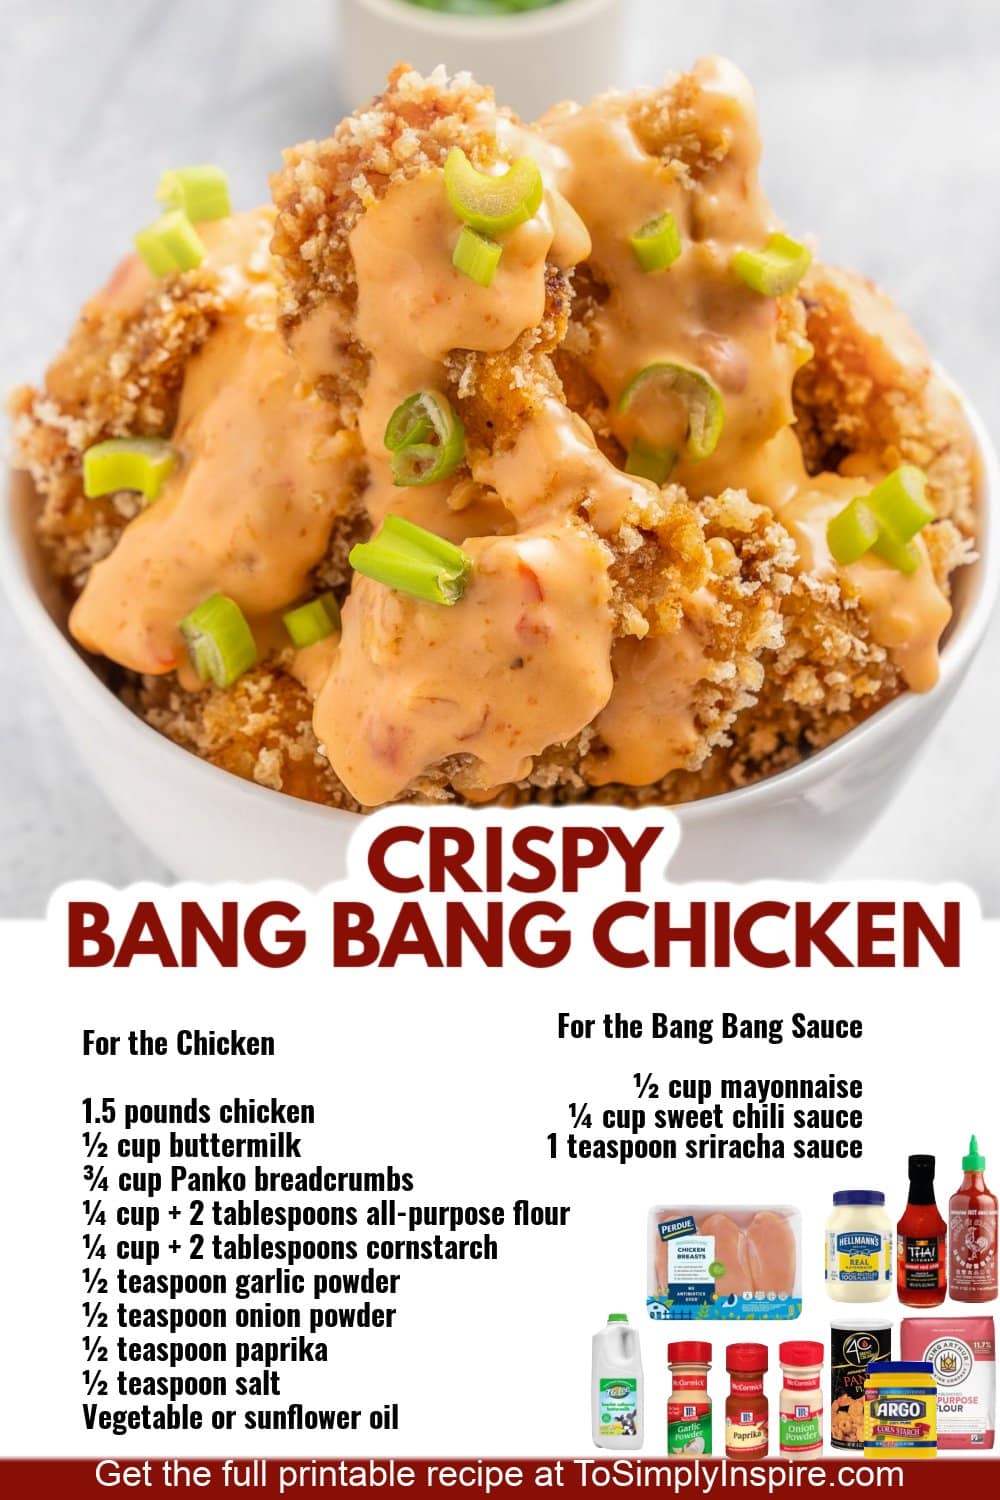 An image of crispy bang bang chicken topped with green onions and sauce, perfect for easy dinner ideas. Ingredients and recipe instructions are listed, with product logos at the bottom. Link to full recipe